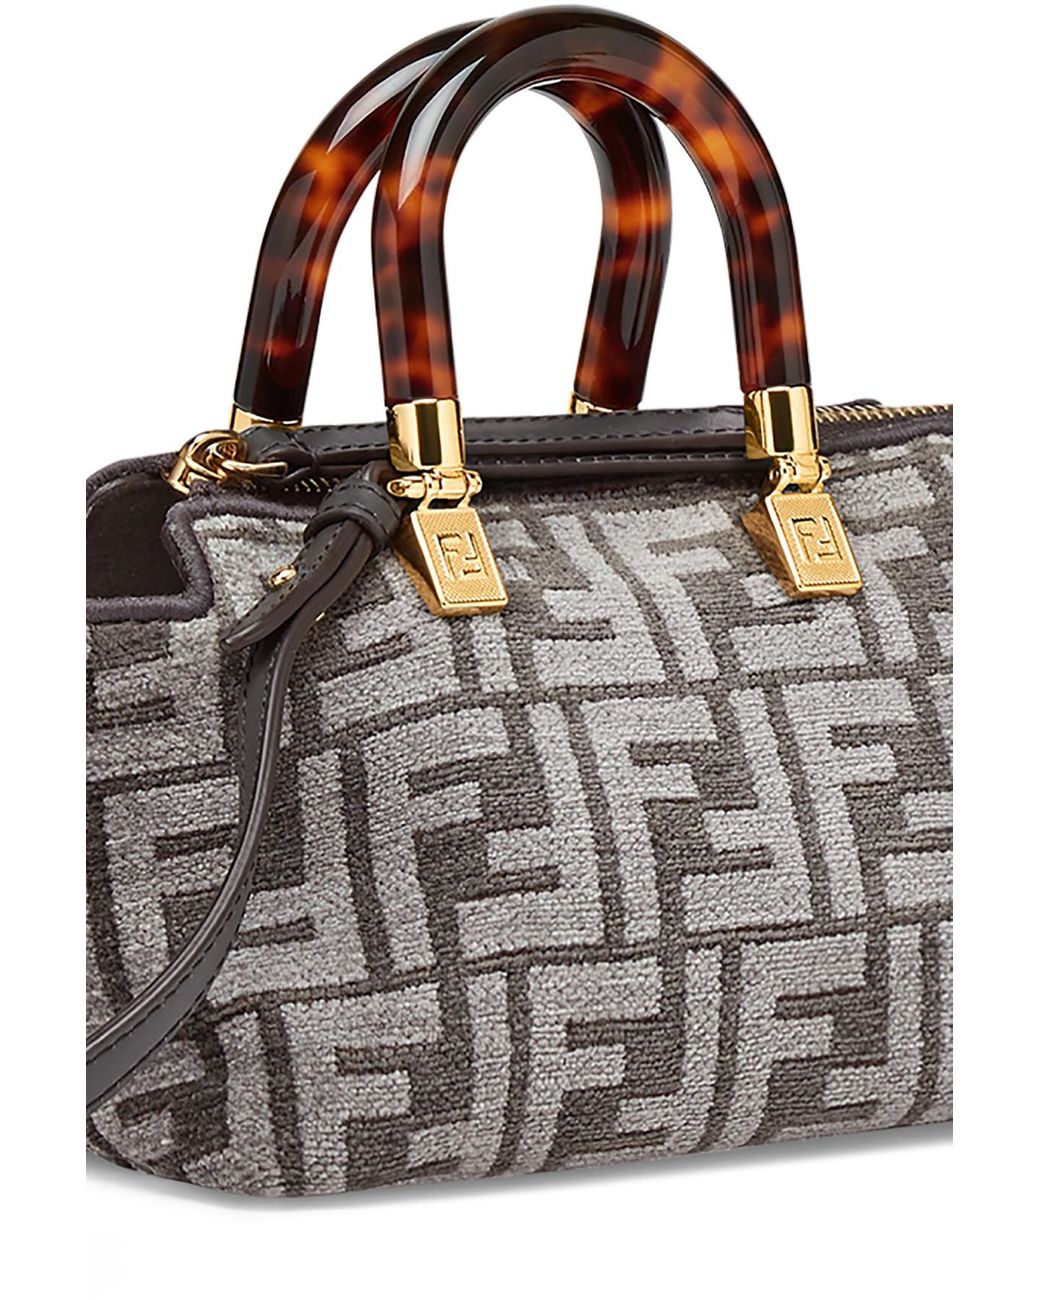 By The Way Mini - Small Boston bag in dark grey tapestry fabric